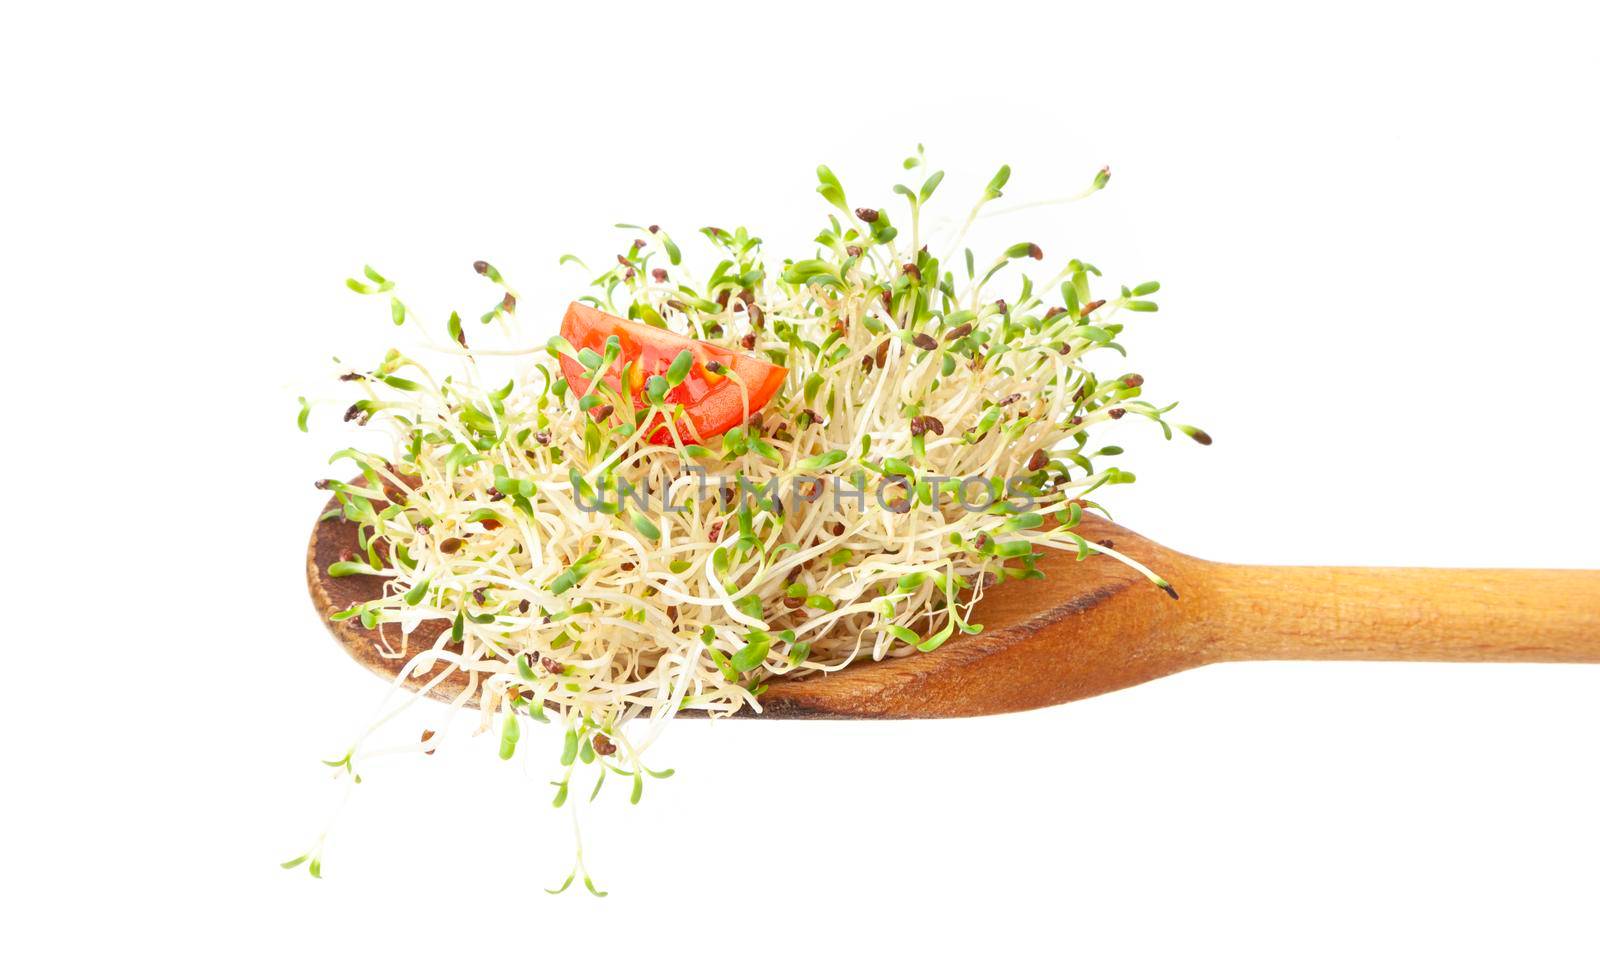 Alfalfa sprouts on a wooden spoon by SlayCer